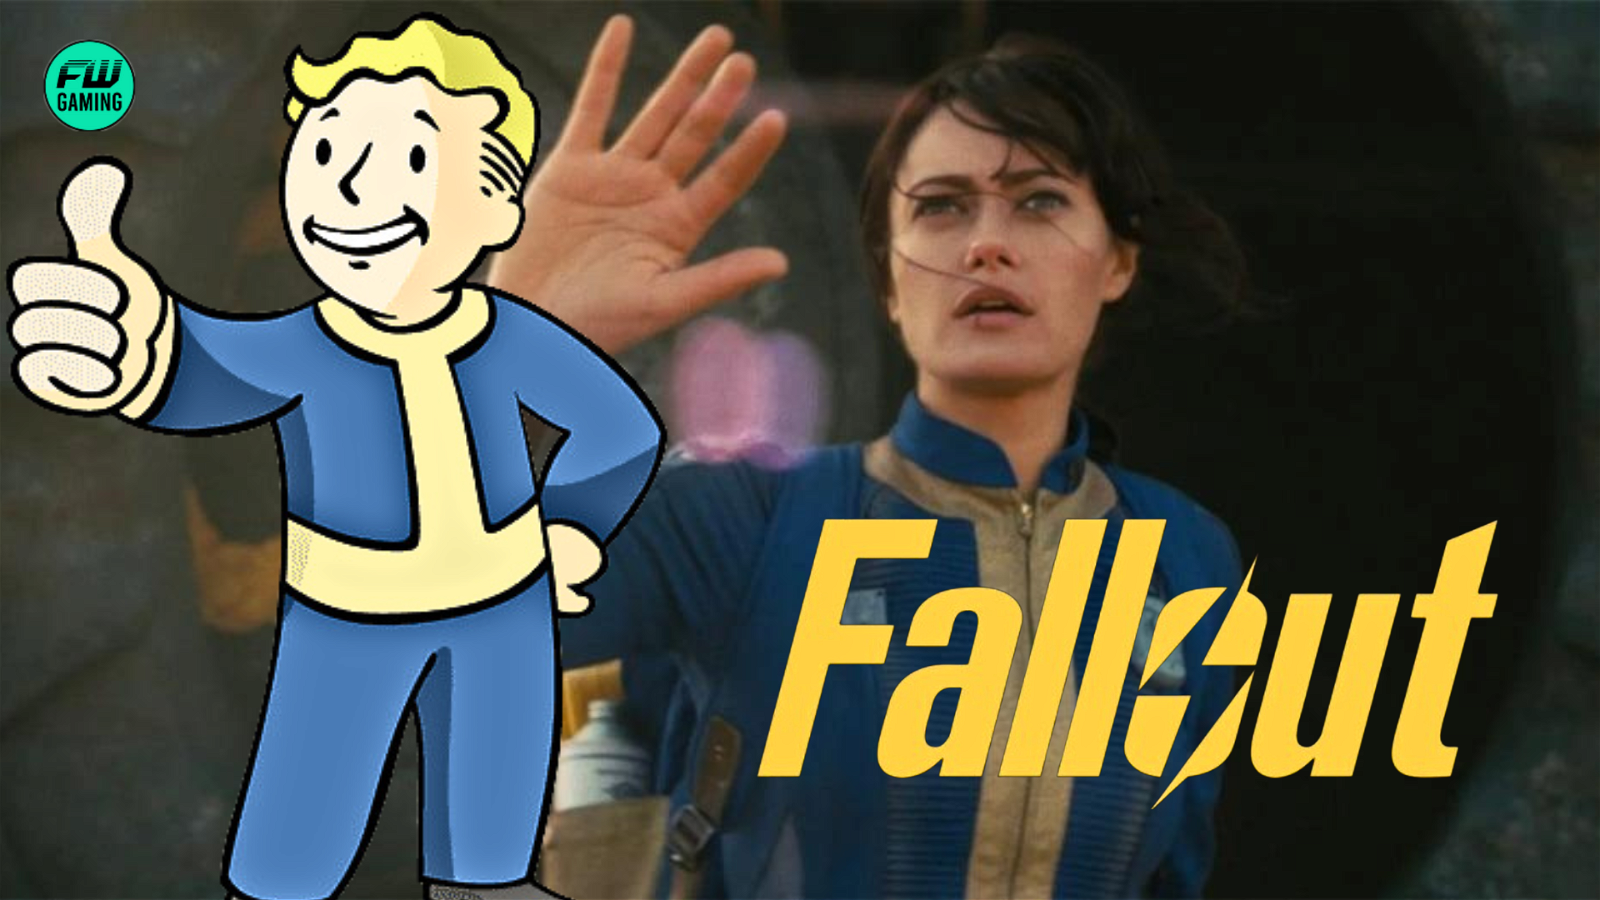 Prime Video’s Fallout TV Show Gets a Spectacular Official Trailer – Step Aside The Last of Us, a New Faithful Gaming Adaptation is Here